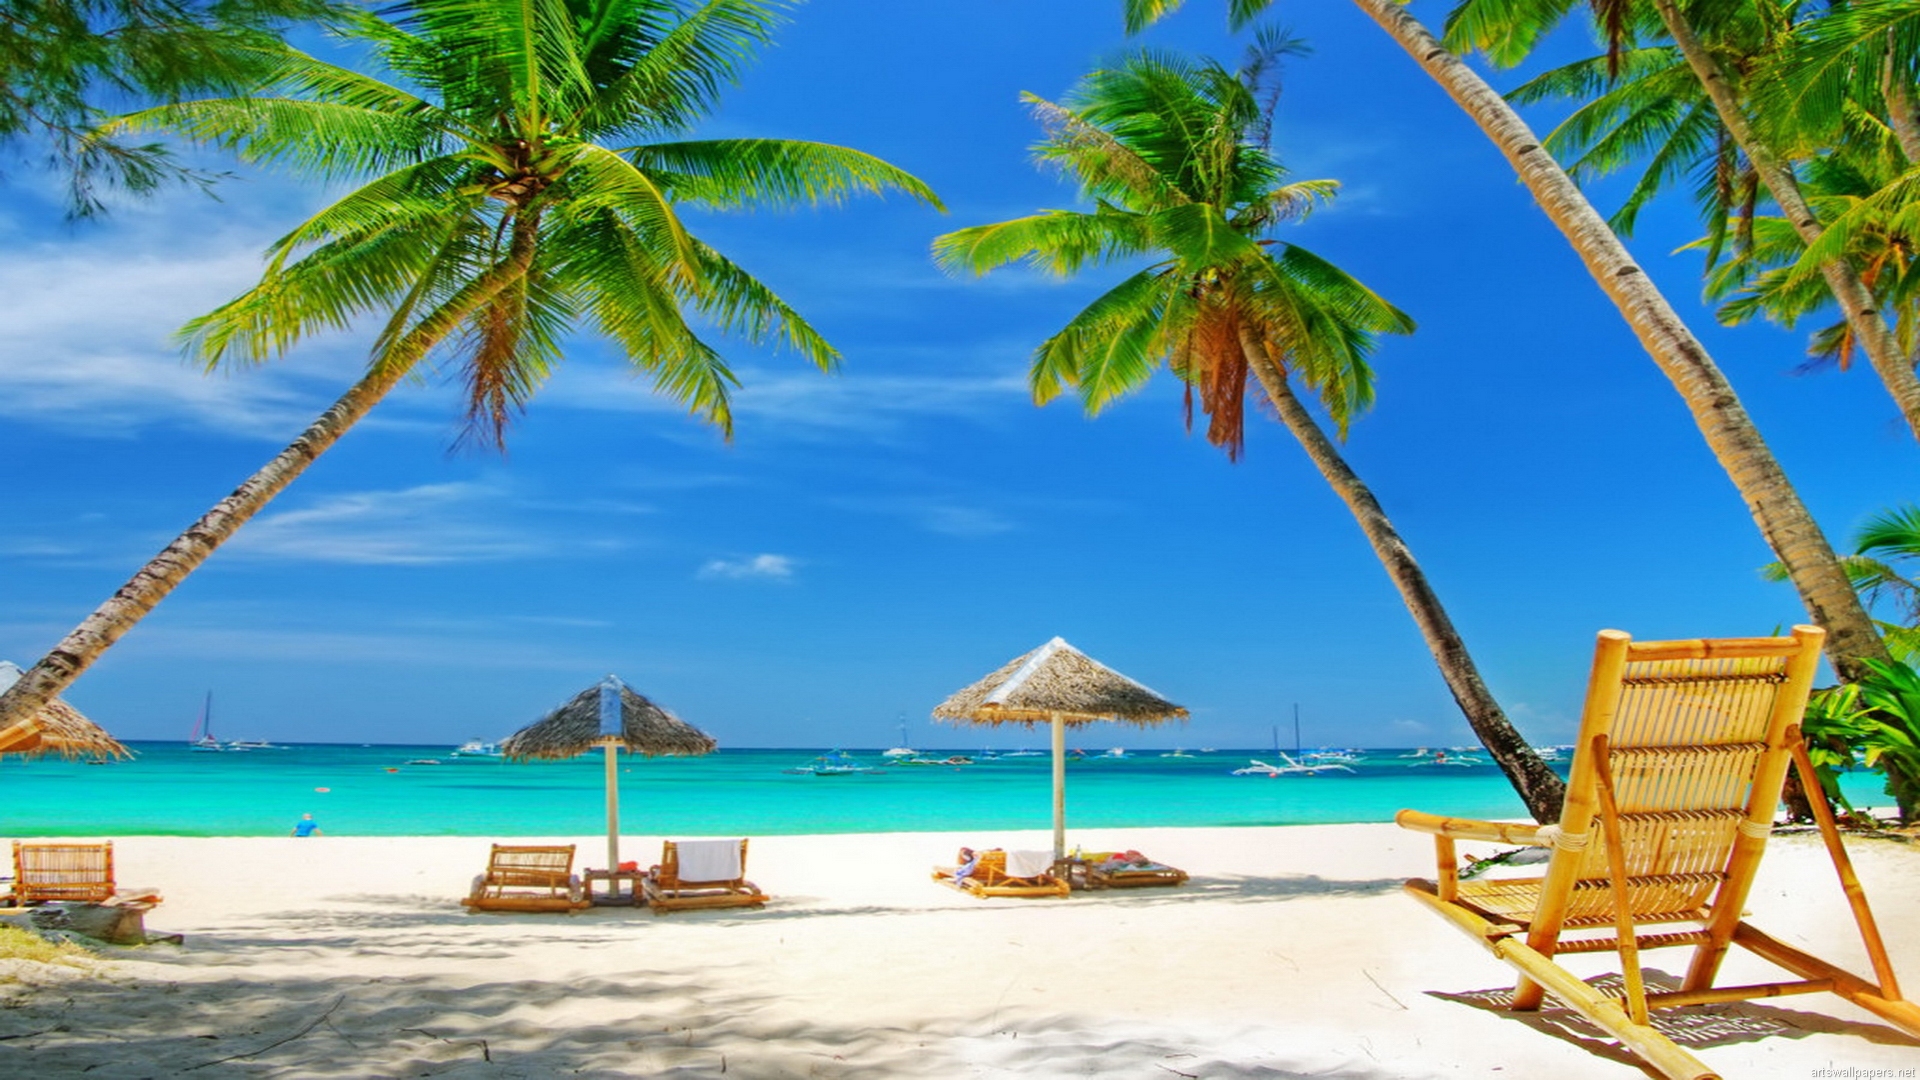 Sunny Beach Wallpaper Pictures In High Definition Or Widescreen